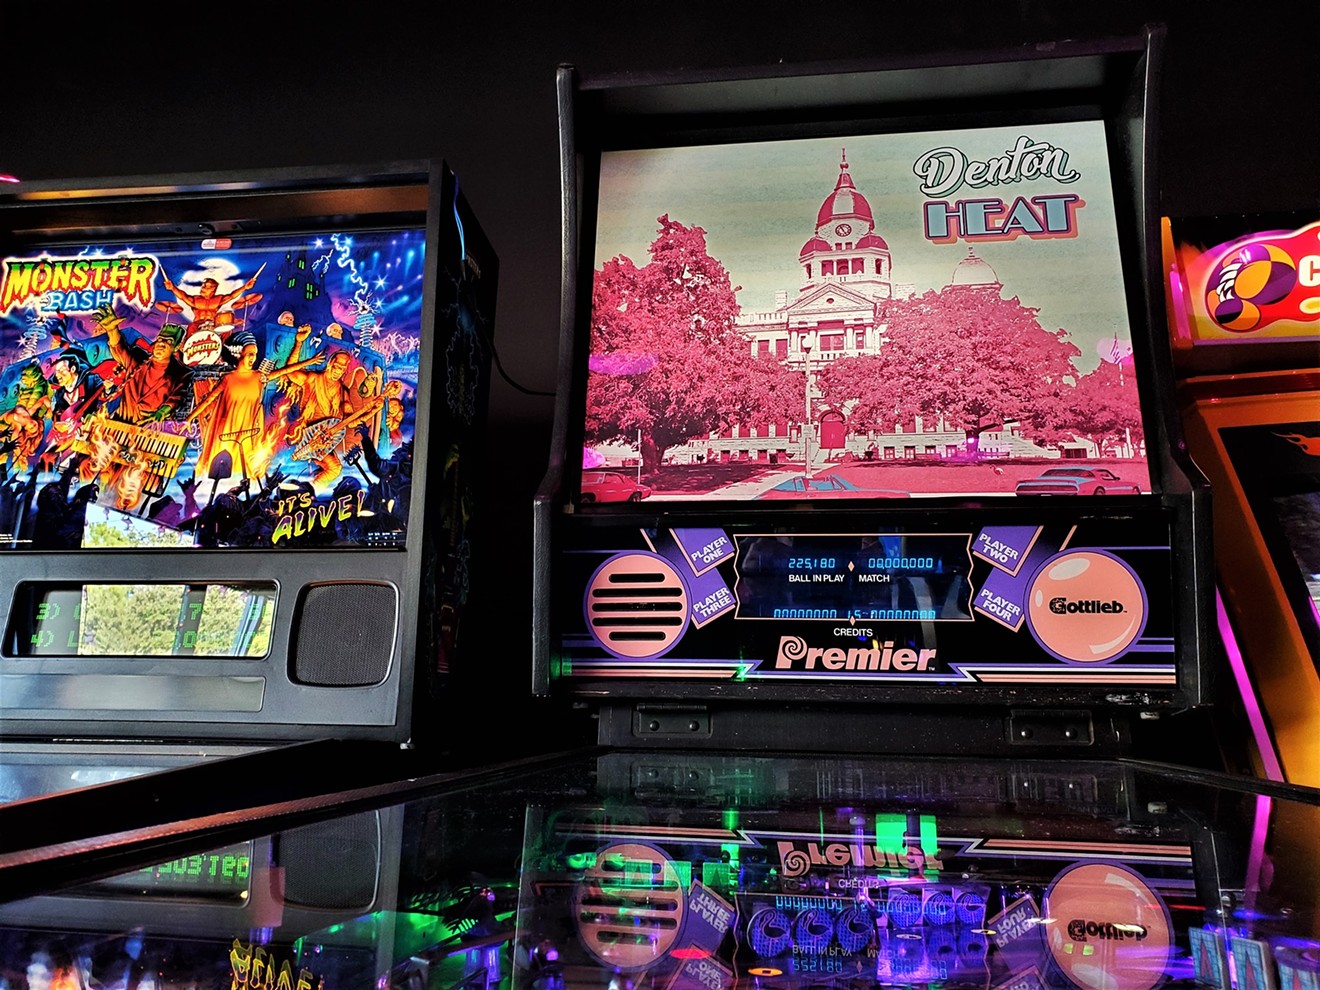 A custom-made pinball machine called Denton Heat that's based on Gottlieb's Hollywood Heat at the now former location of Free Play Arcade's franchise in Denton.